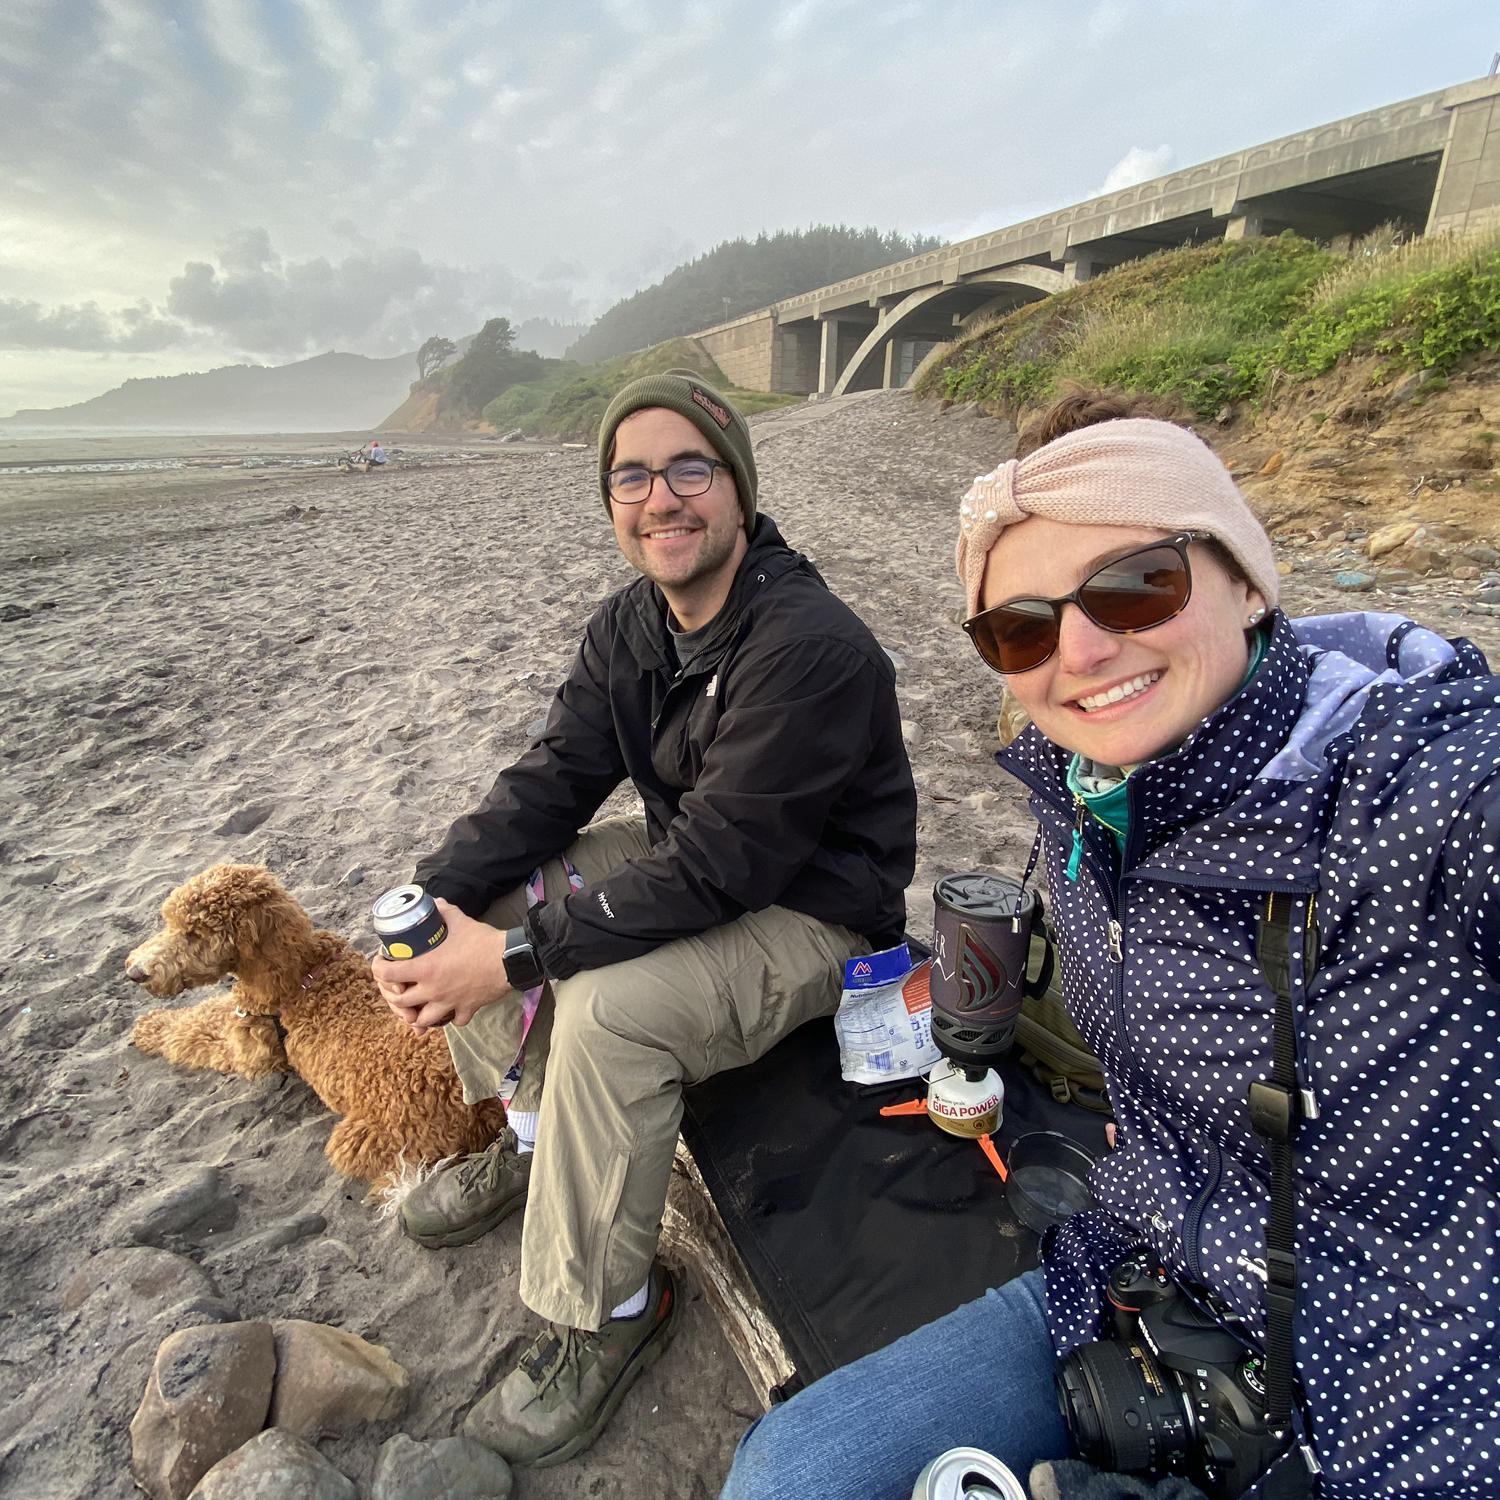 Beverly Beach, the last night before the engagement. We had a freeze-dried camping meal thanks to our trusty jet-boil and ate on the beach during sunset, 2021